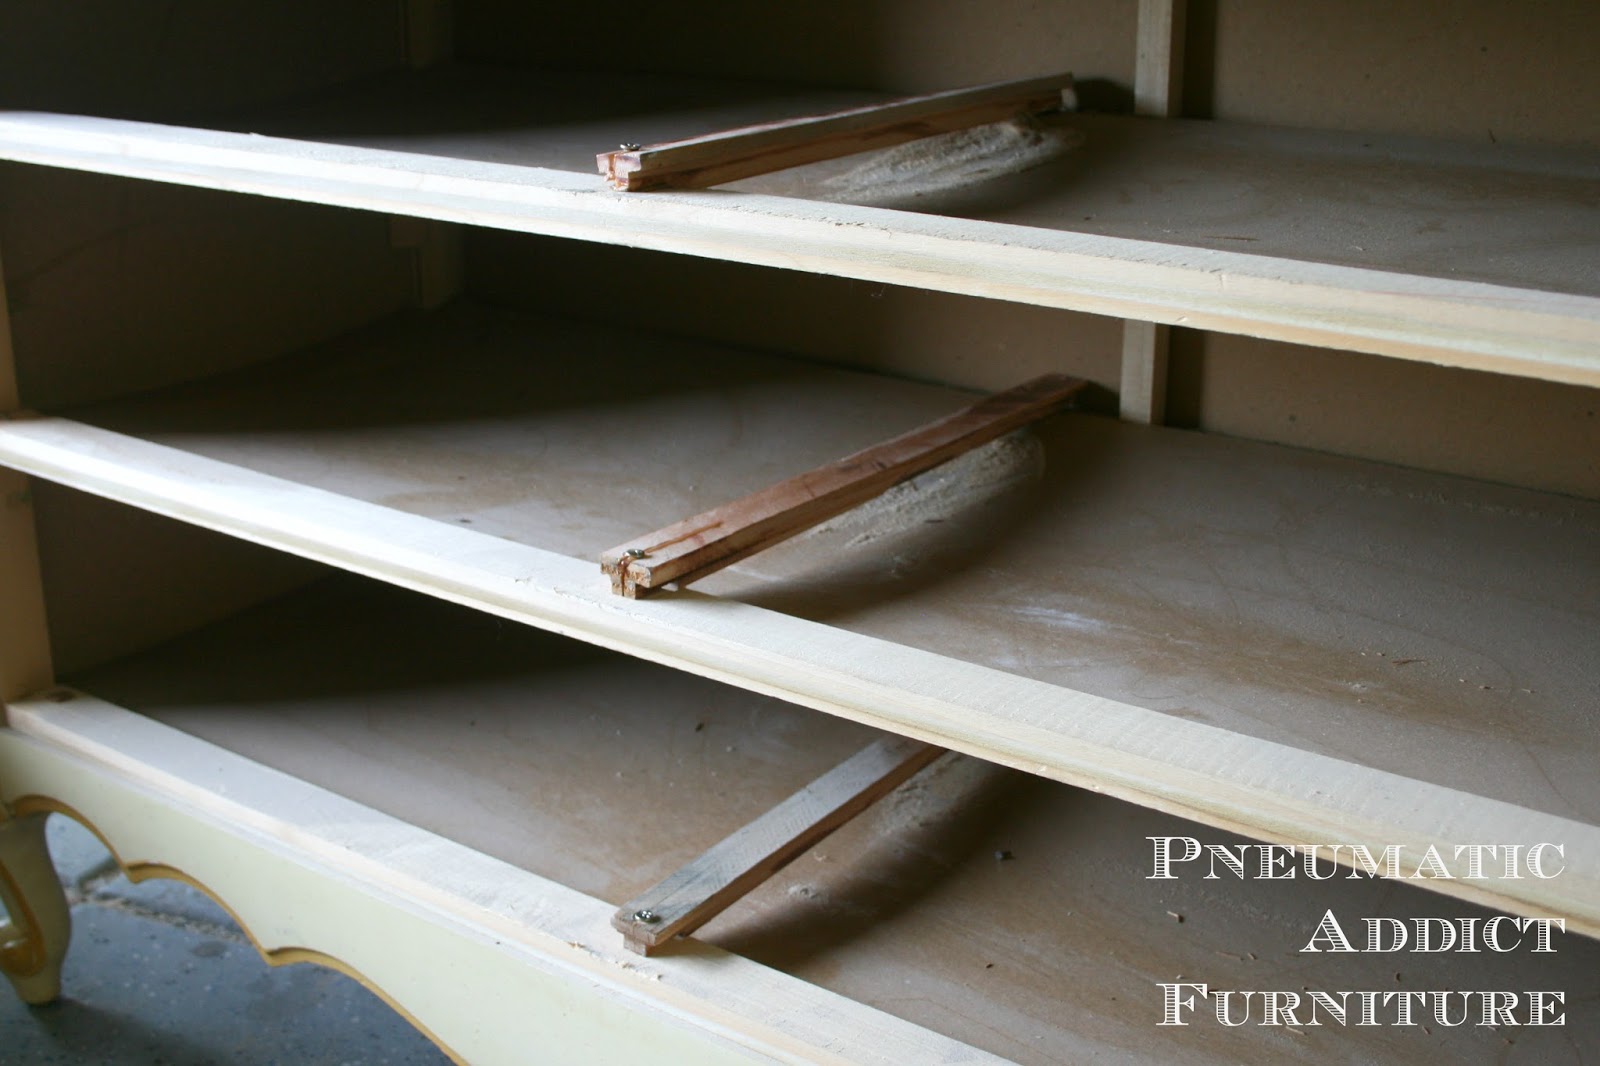 How To Build Your Own Drawer Slides, Repair Dresser Drawer Tracks